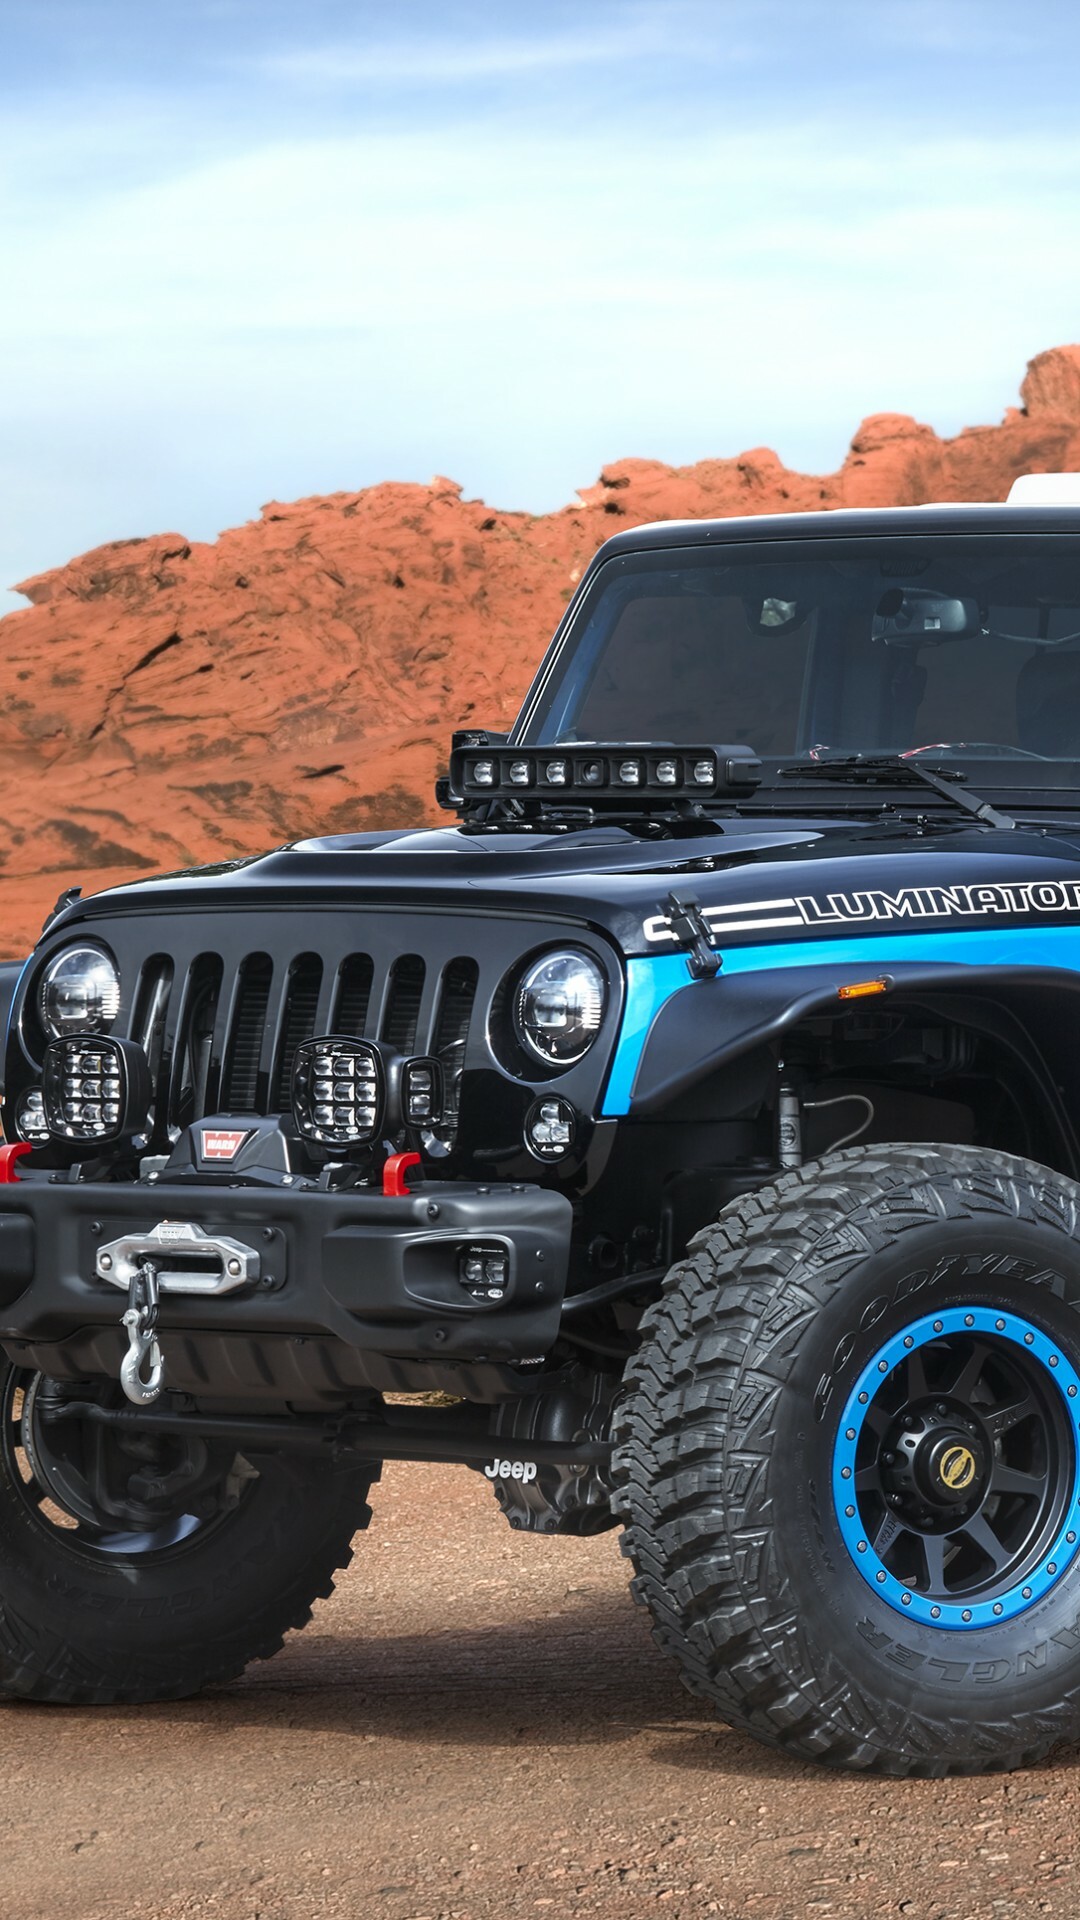 Jeep Wrangler: Luminator concept, SUV, American off-road cars, Vehicle. 1080x1920 Full HD Background.